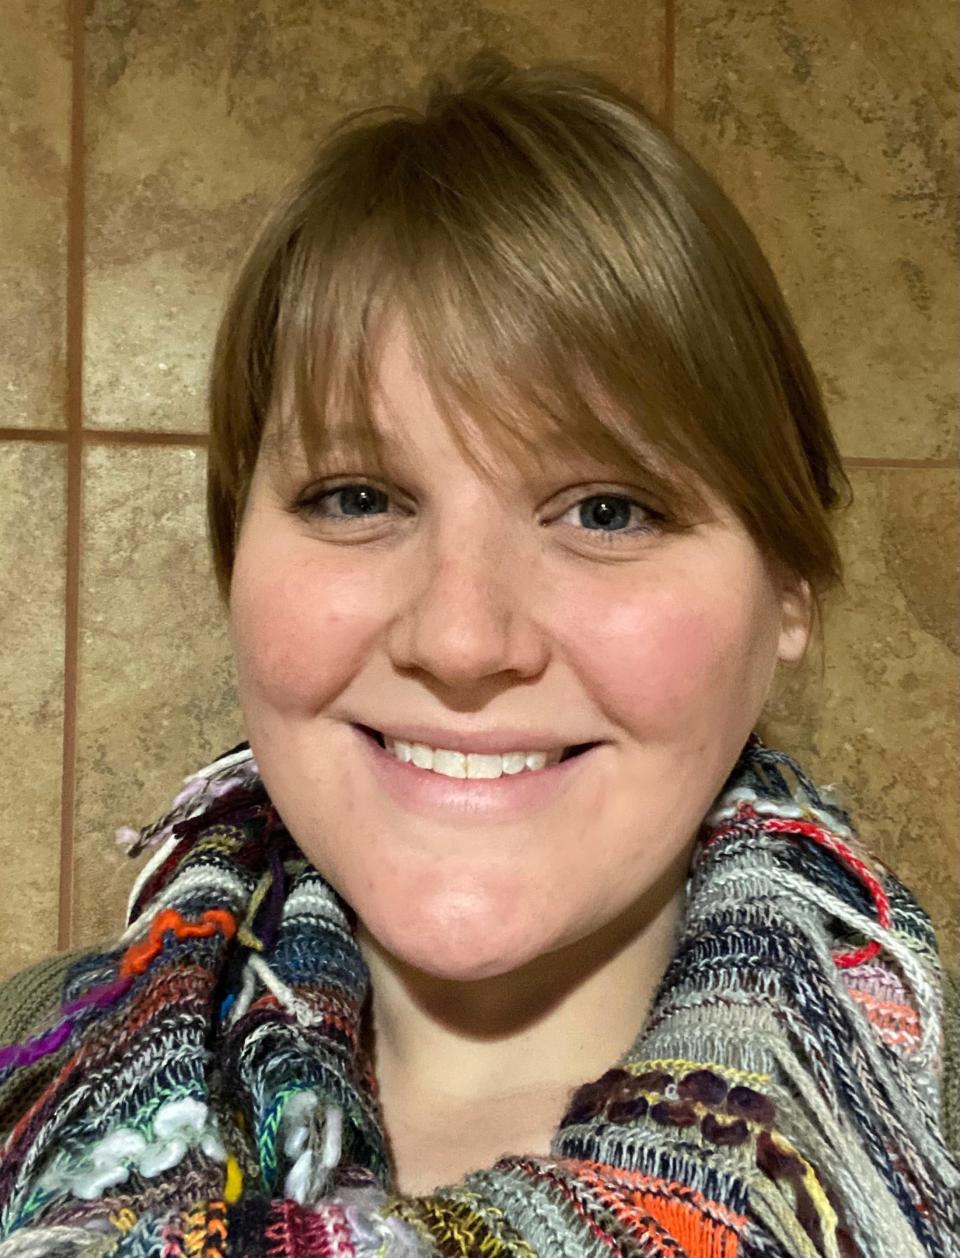 Sarah Hinkelman is the site manager of the Newark Earthworks and a former Park Guide at Hopewell Culture National Historical Park in Chillicothe.